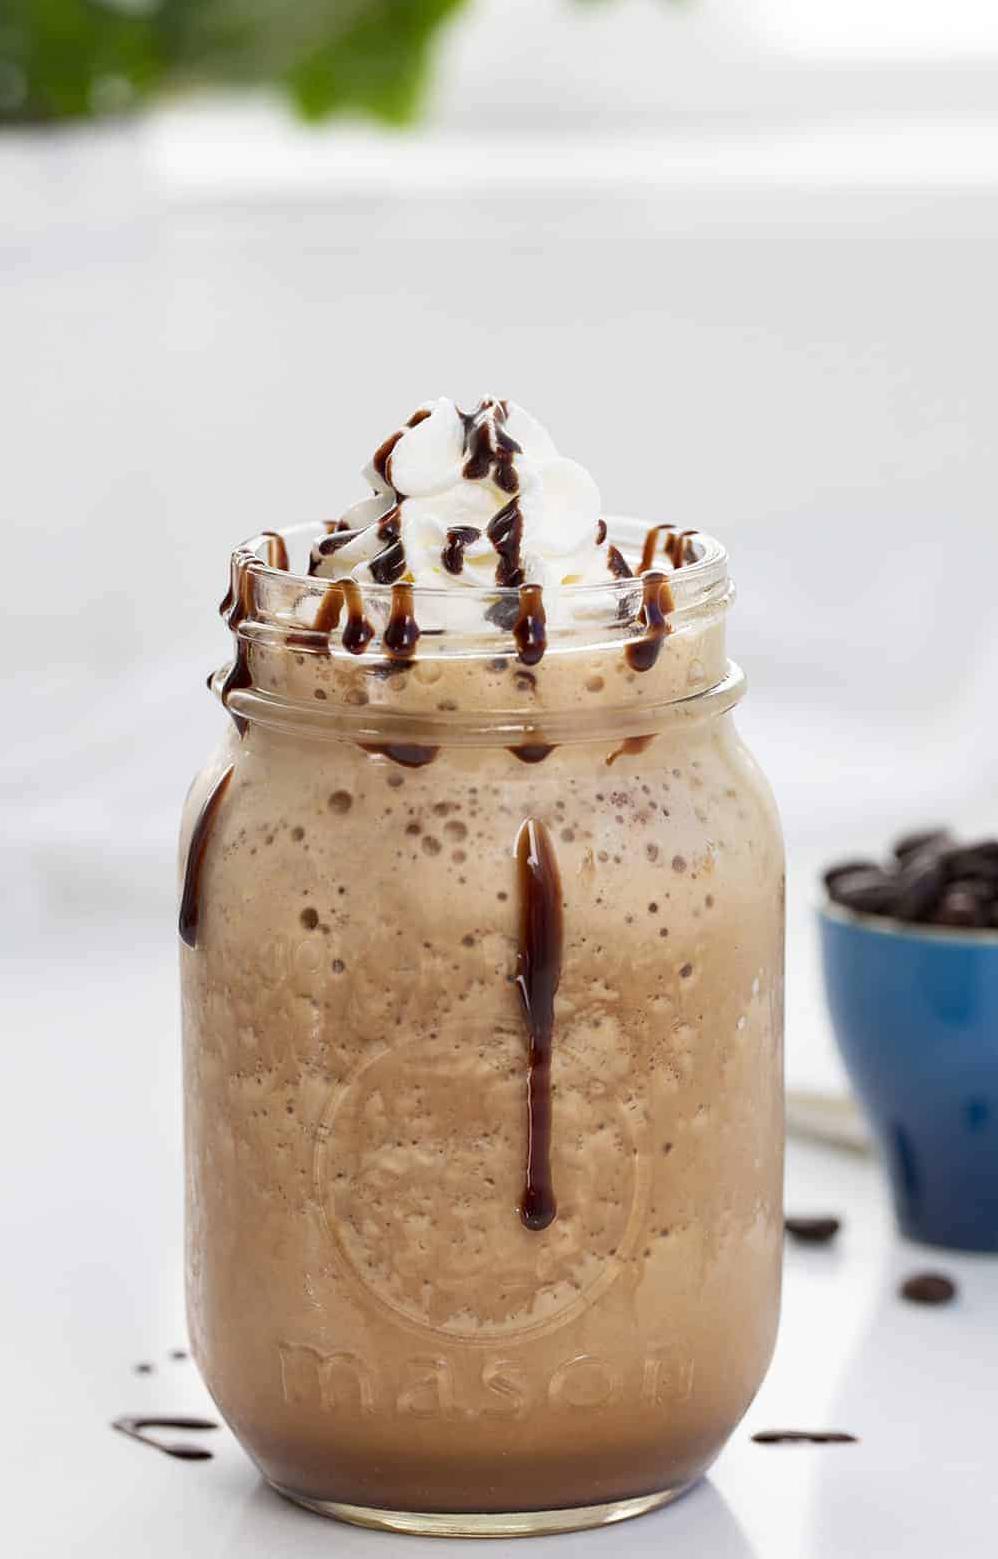  Take a break from your day and indulge in a mocha frappuccino with whipped cream.